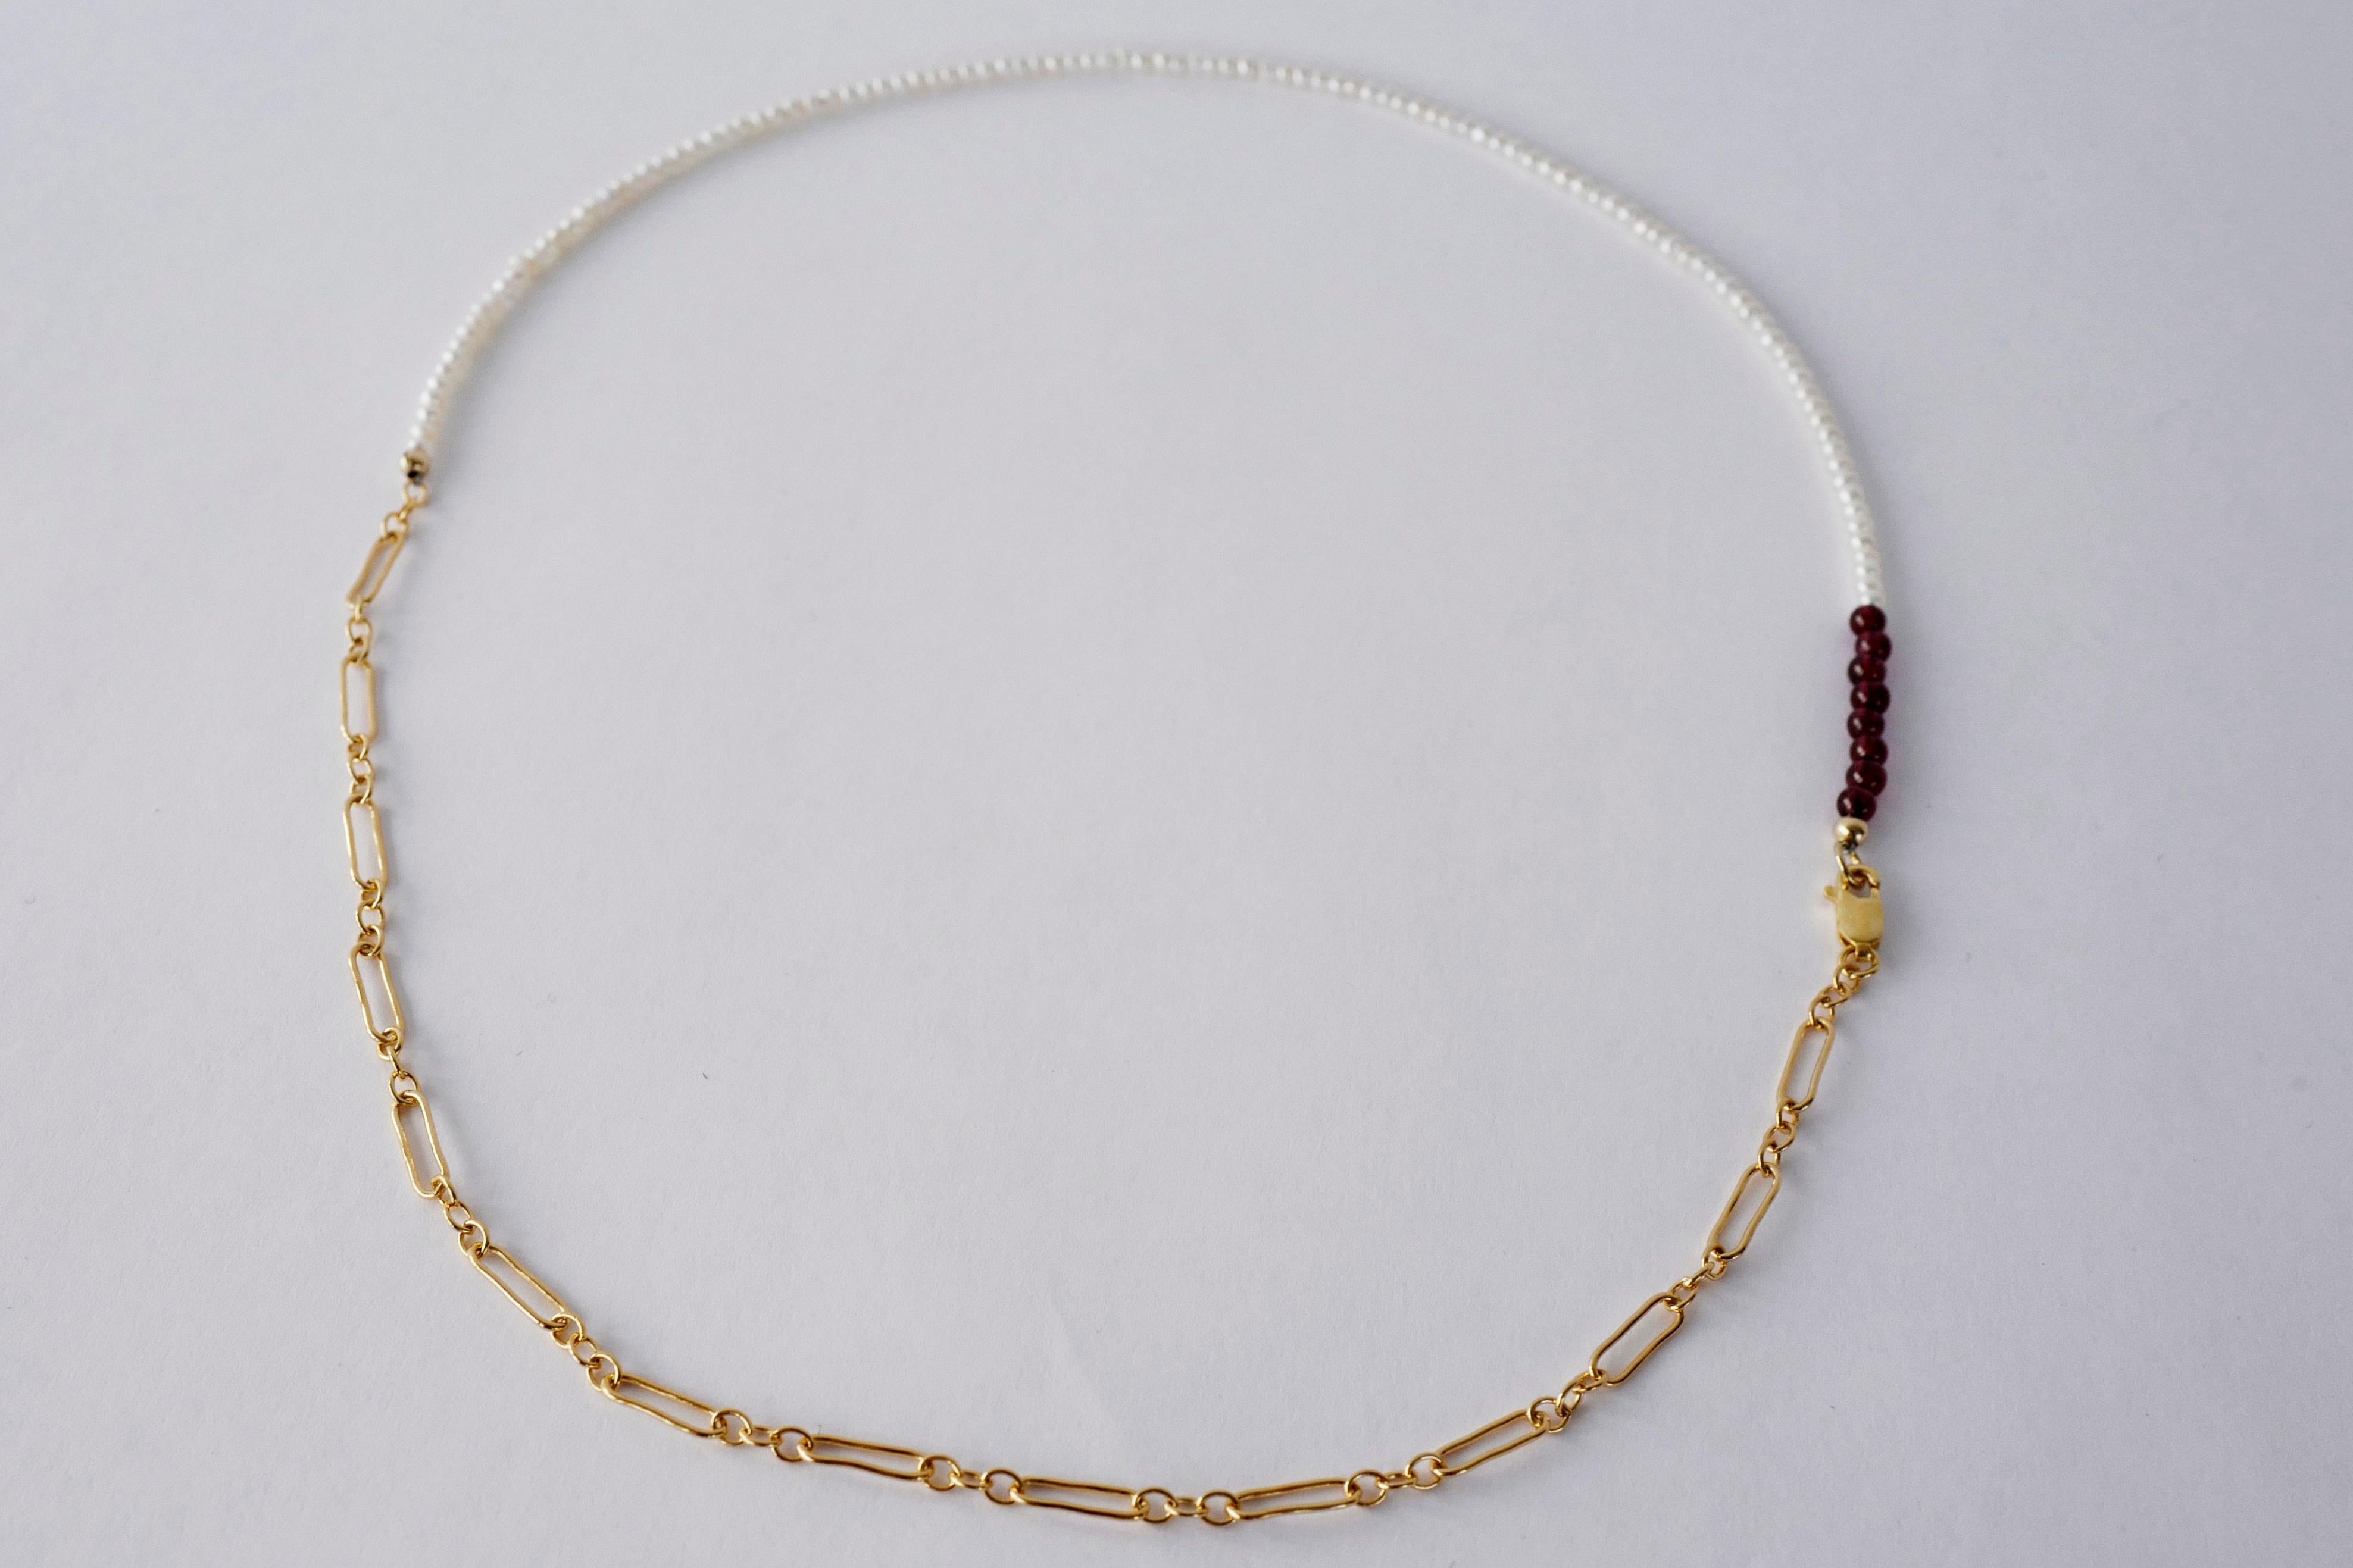 Round Cut White Pearl Red Garnet Choker Bead Necklace Gold Filled Chain 20